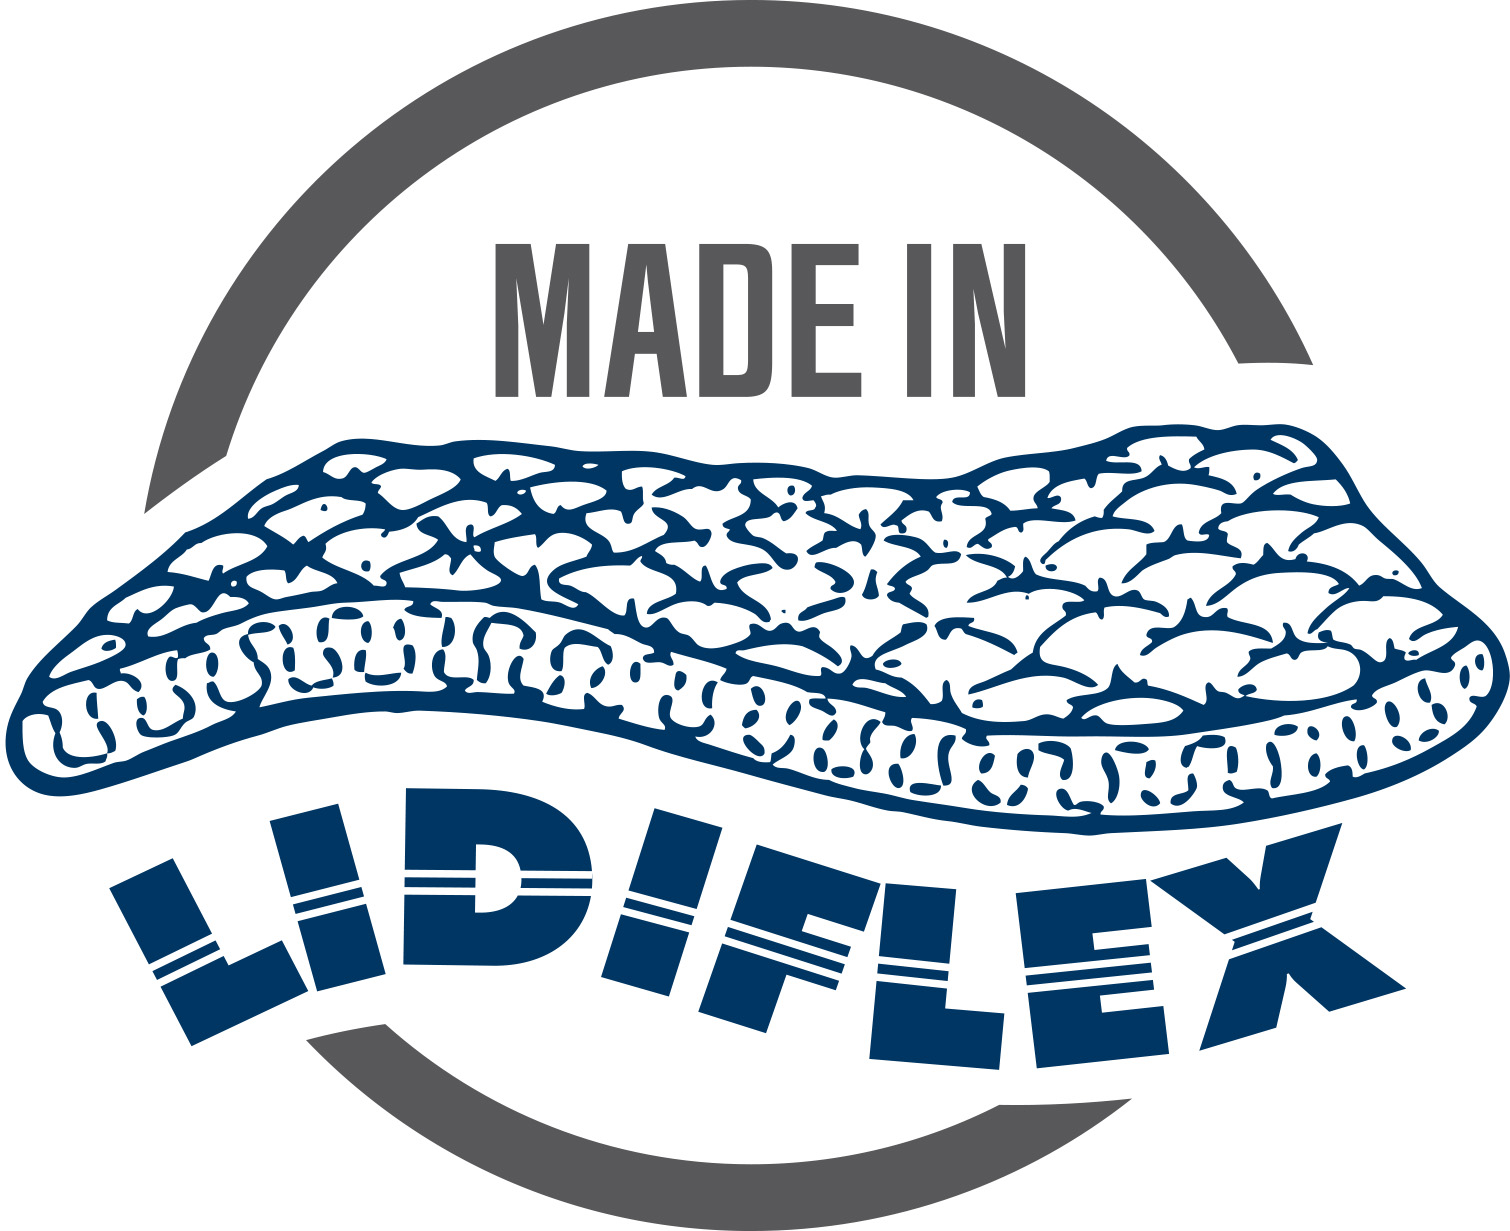 made-in-lidiflex